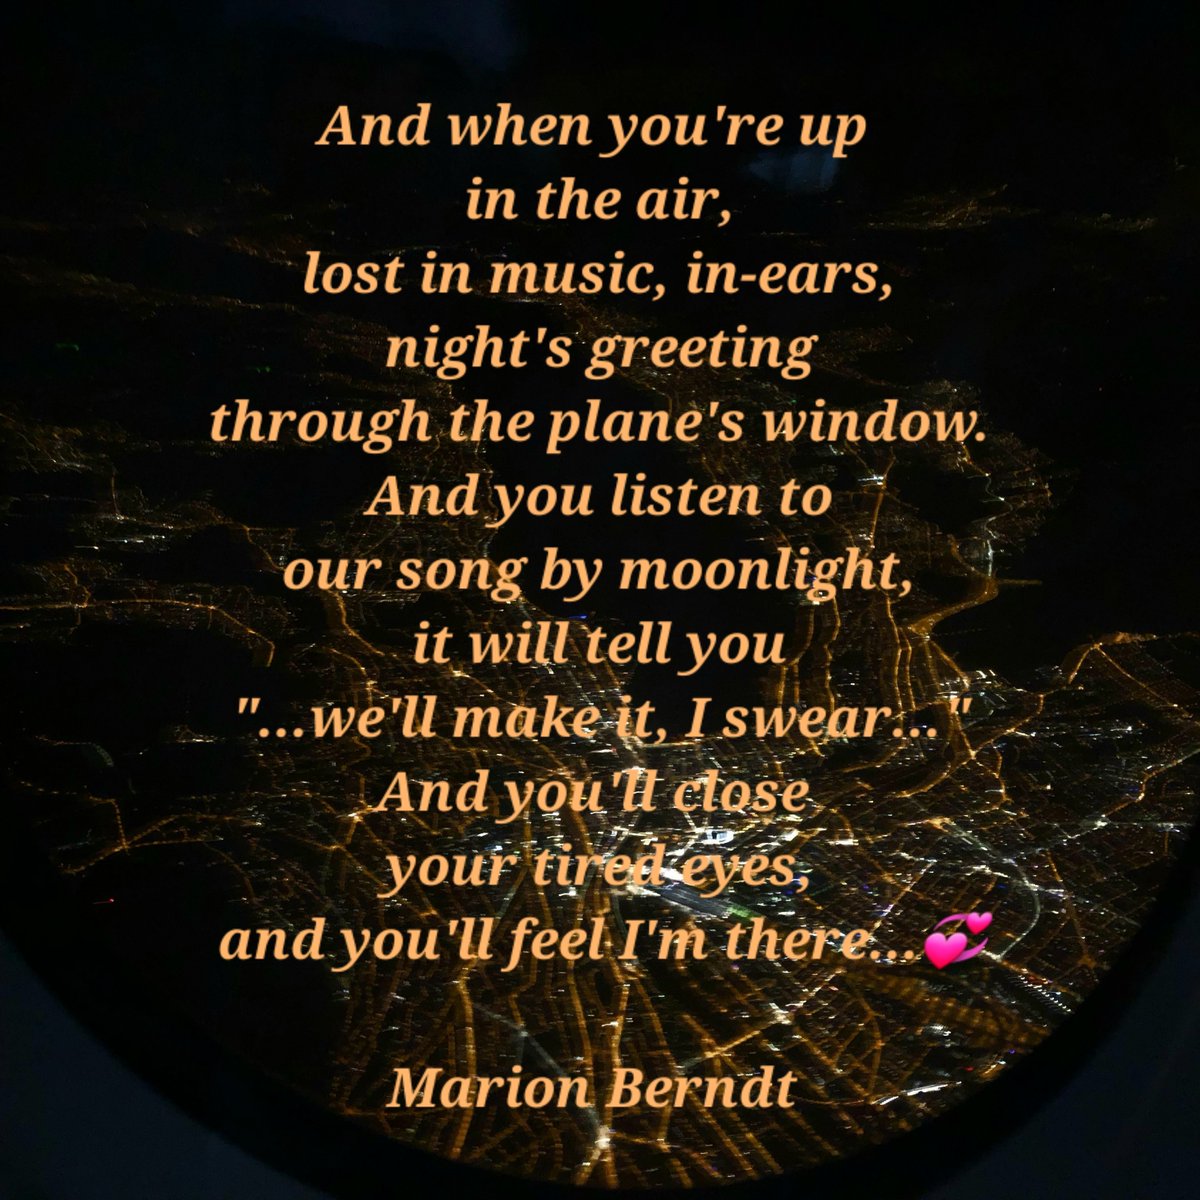 Save travels...💞 ...to dreamland!🏔 Good night!🌜💤 #loveletters 💌 #poetry #poetrycommunity #poetrylovers #poetrytwitter #amwriting #WritingCommunity #love